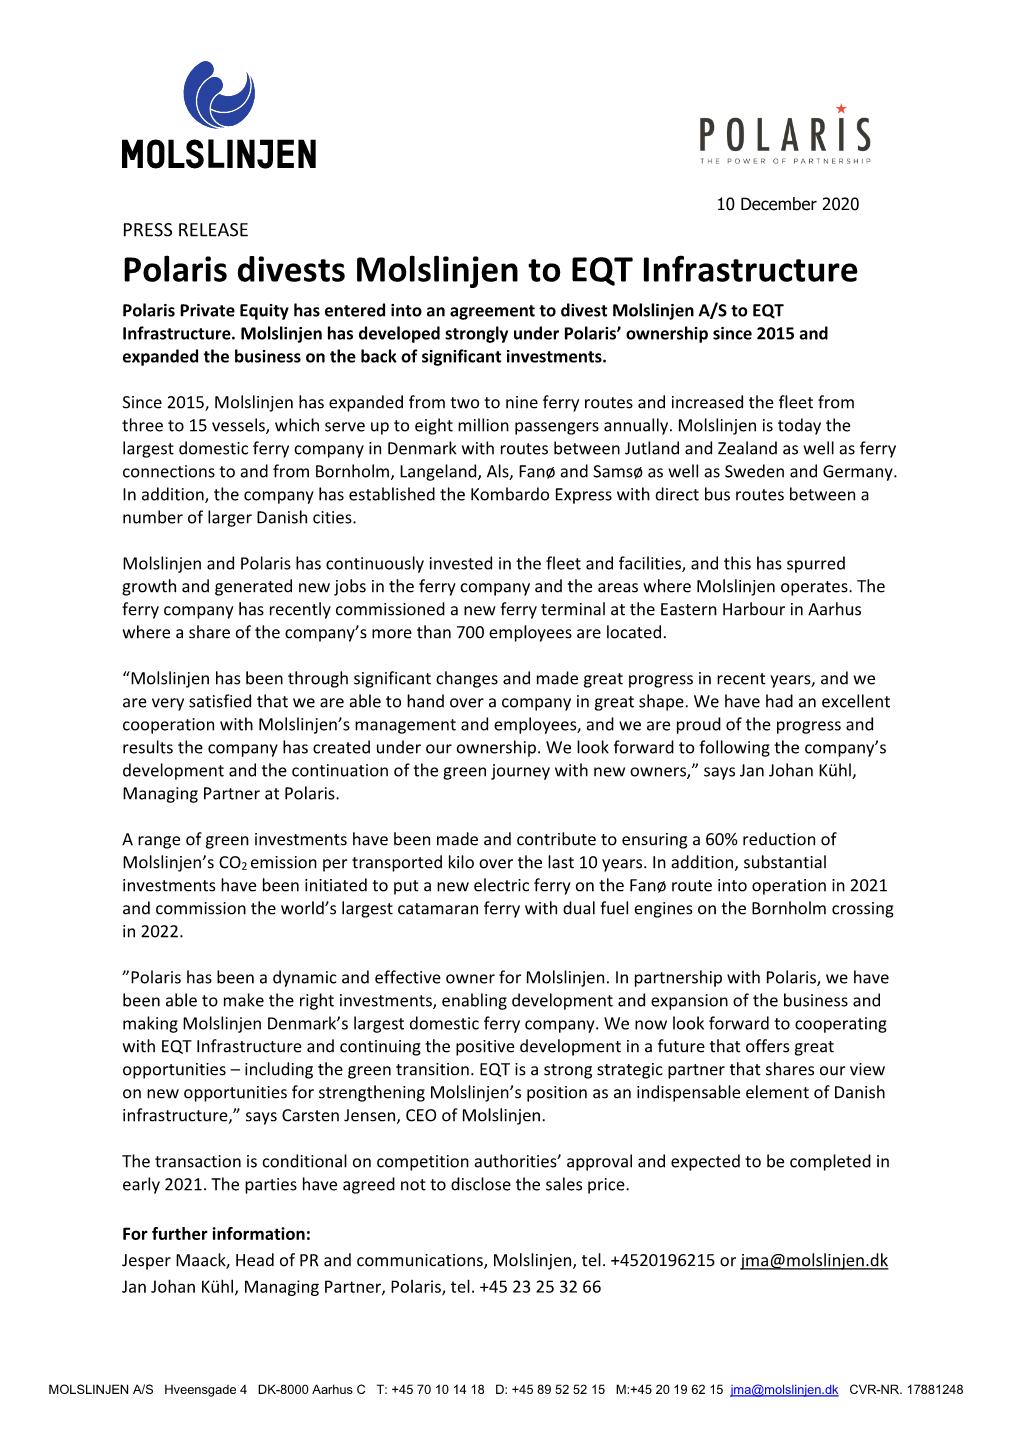 Polaris Divests Molslinjen to EQT Infrastructure Polaris Private Equity Has Entered Into an Agreement to Divest Molslinjen A/S to EQT Infrastructure